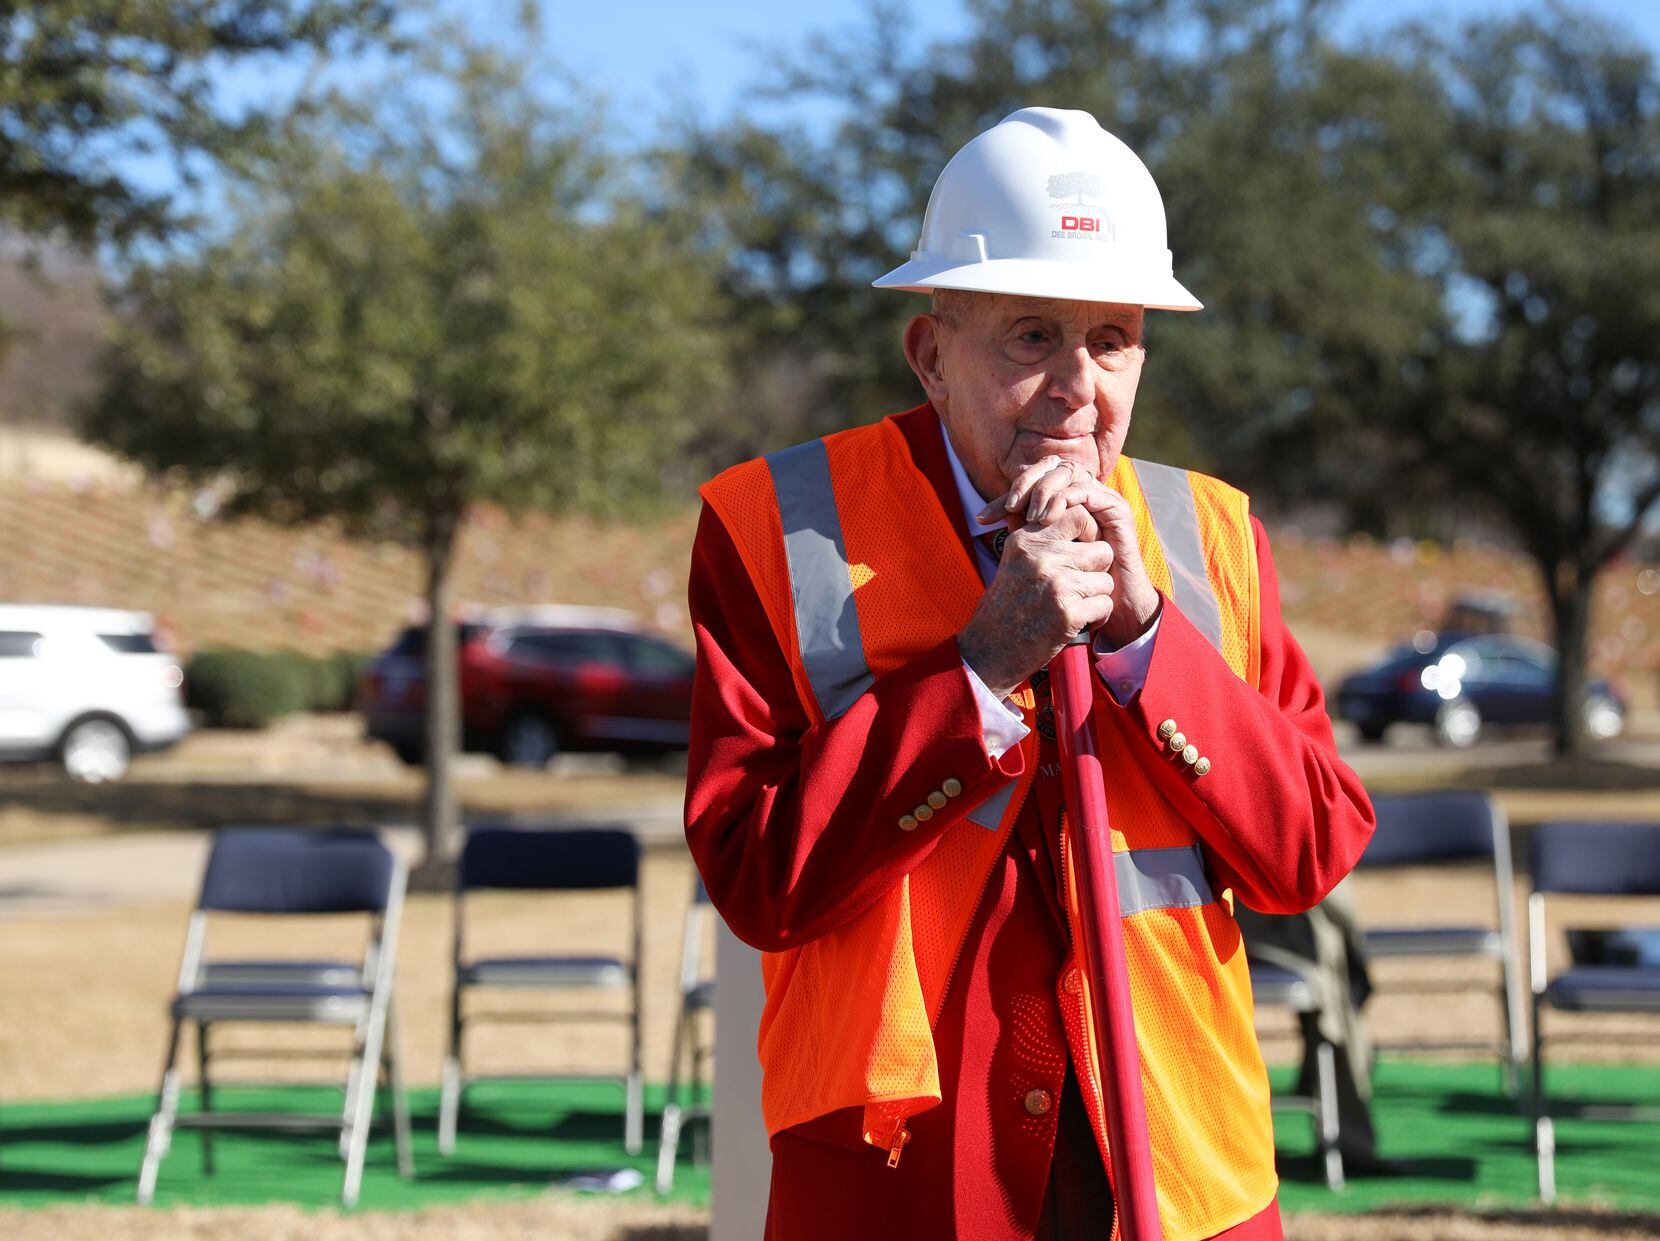 "It took a long time to make this happen," said Marine Corps Lt. Gen. Richard Carey as he held his shovel for the Chosin Few Memorial groundbreaking at Dallas-Fort Worth National Cemetery on Monday, Jan. 10, 2022.